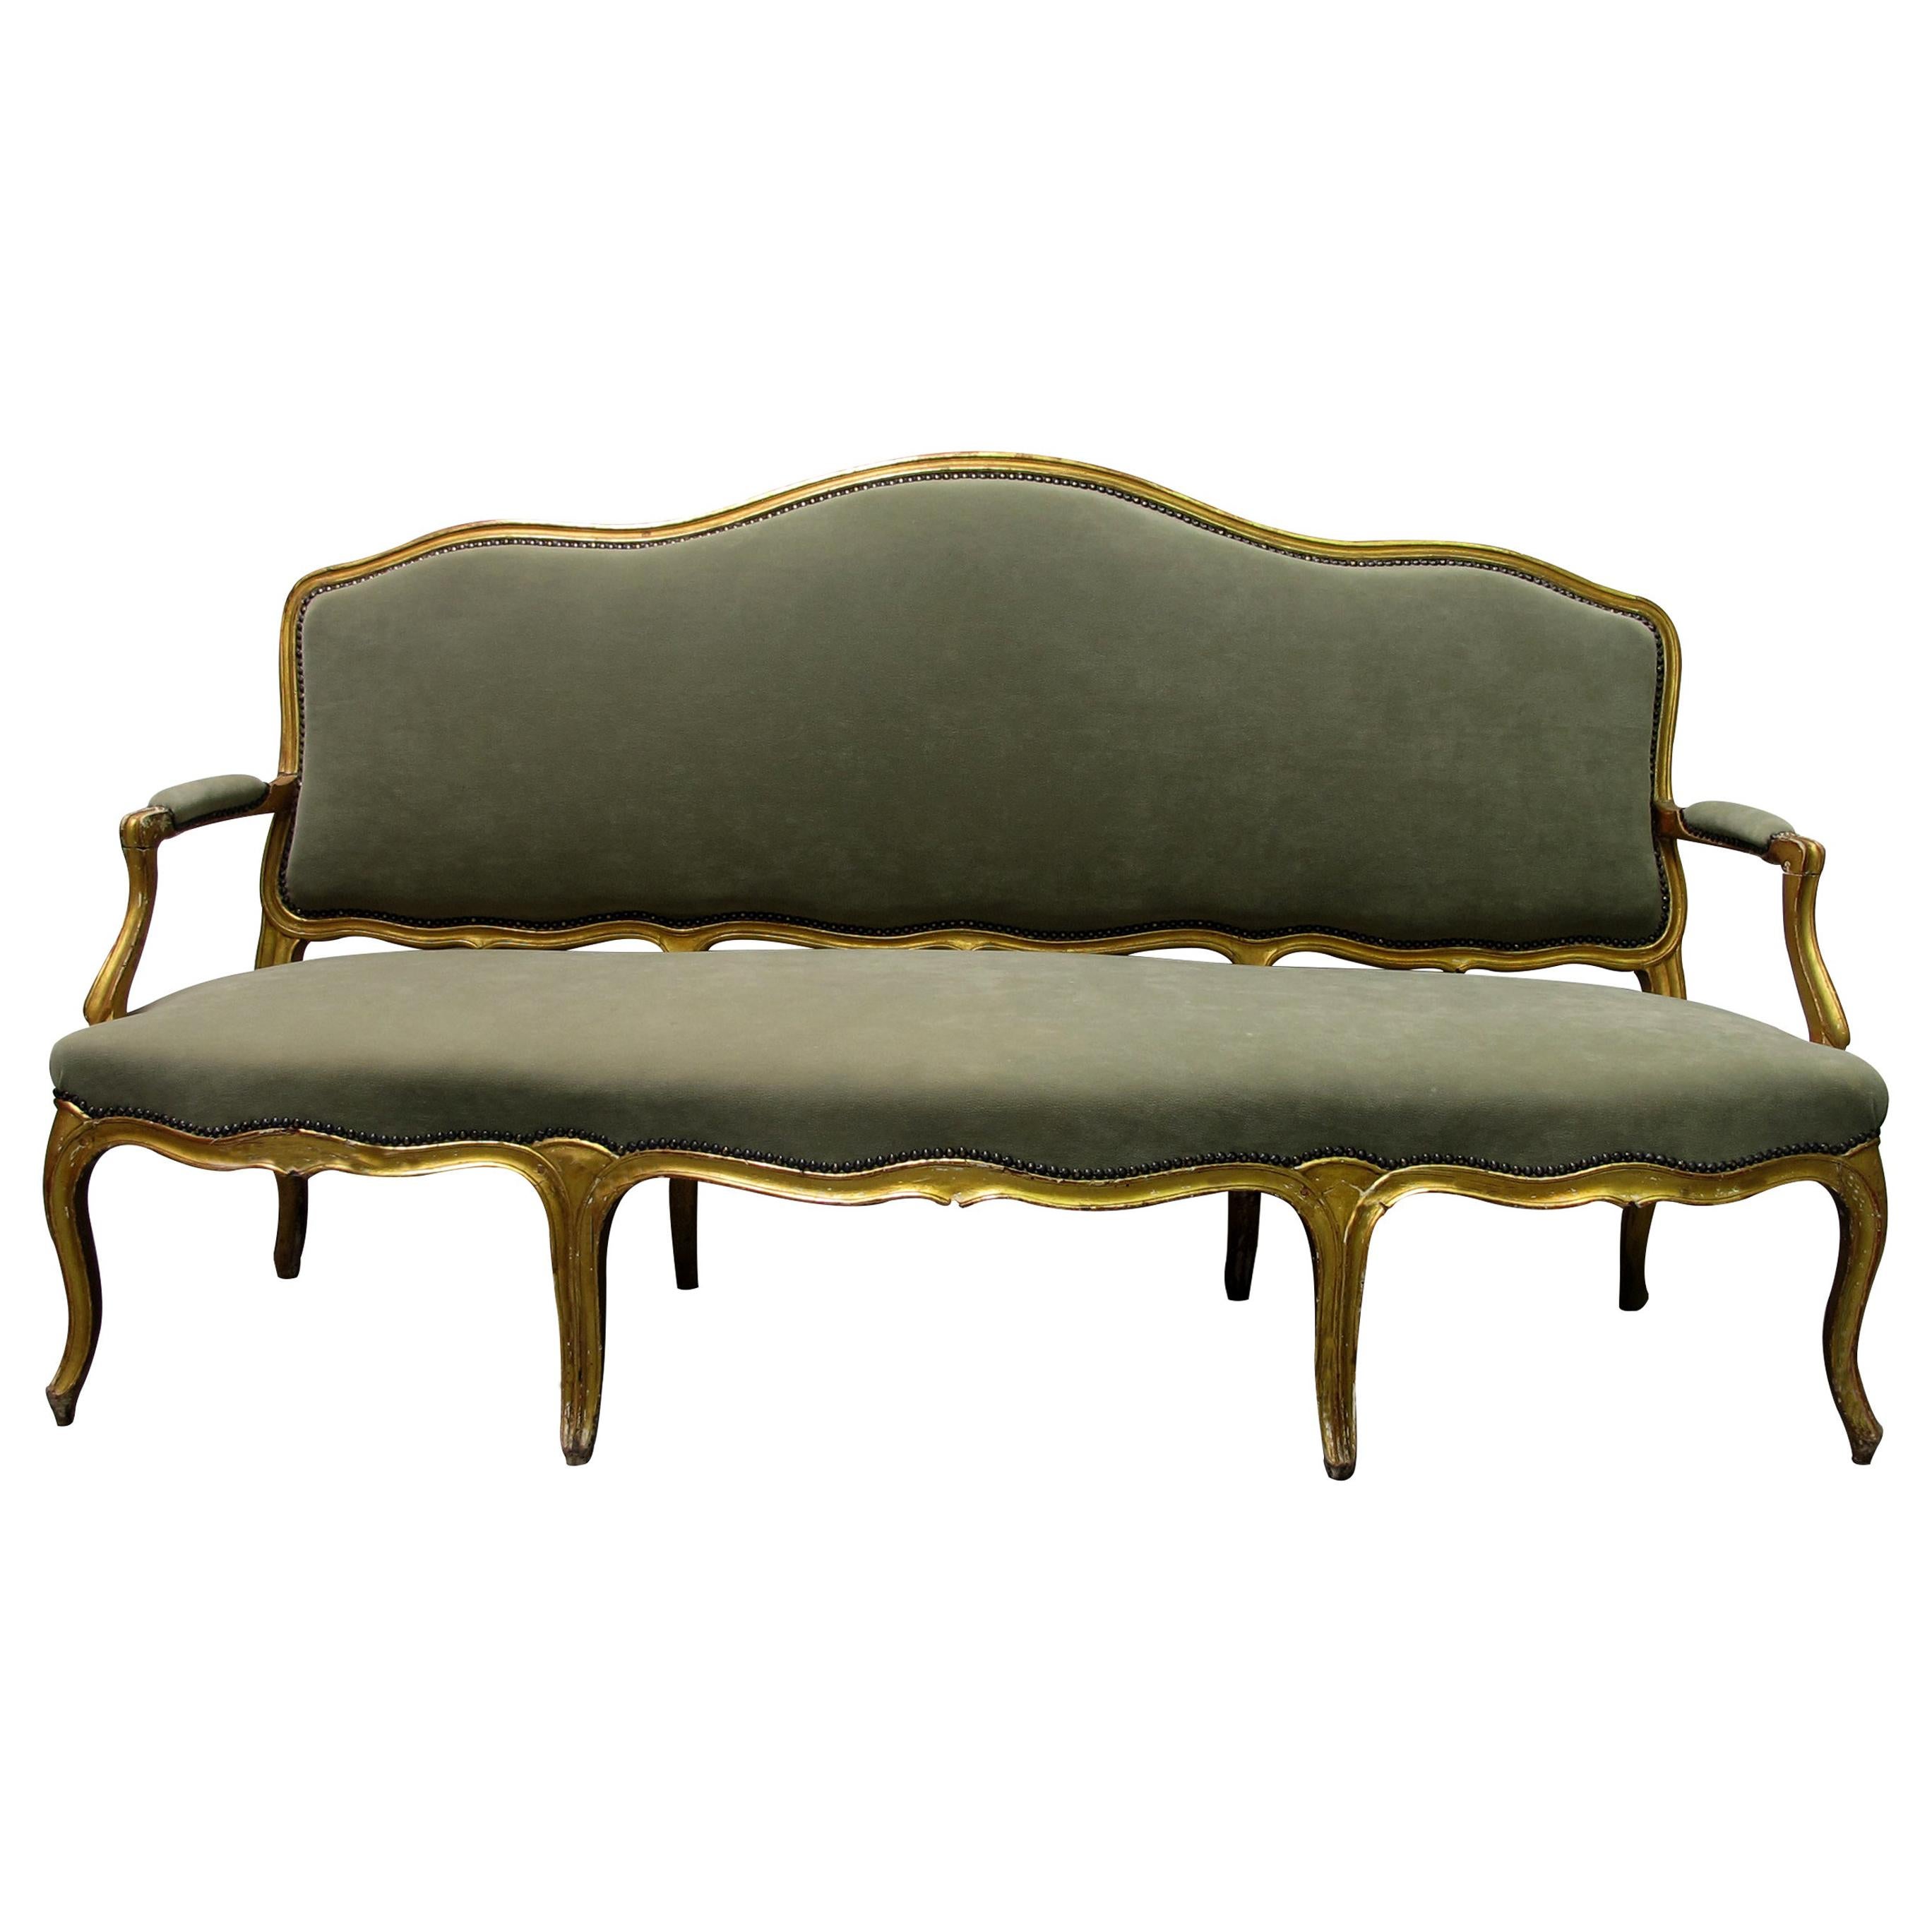 Late 19th Century French Gilt Carved Wood Canapé, Sofa Louis XV Style